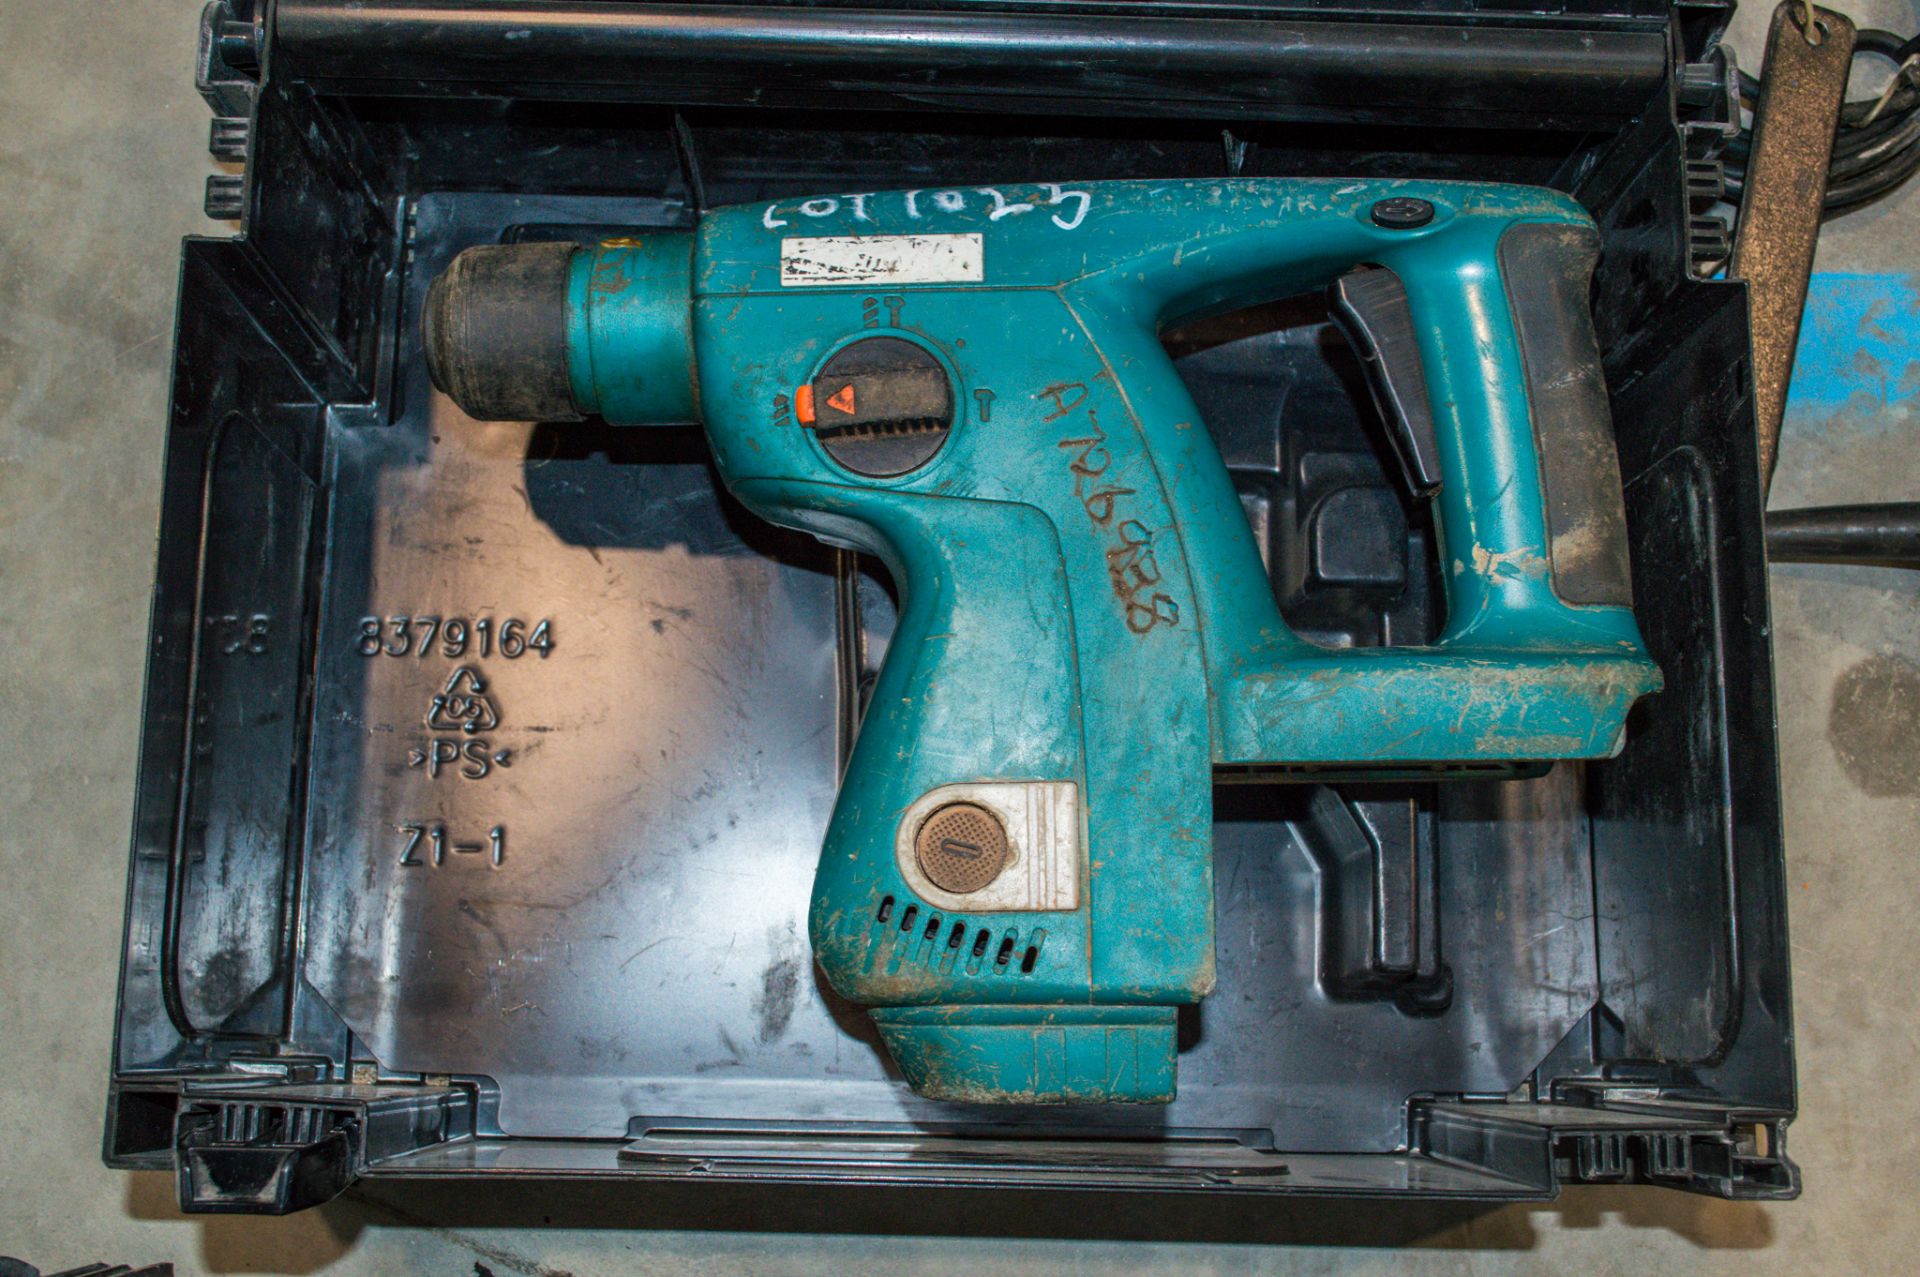 Makita BHR200 SDS rotary hammer drill c/w carry case A726938 CO